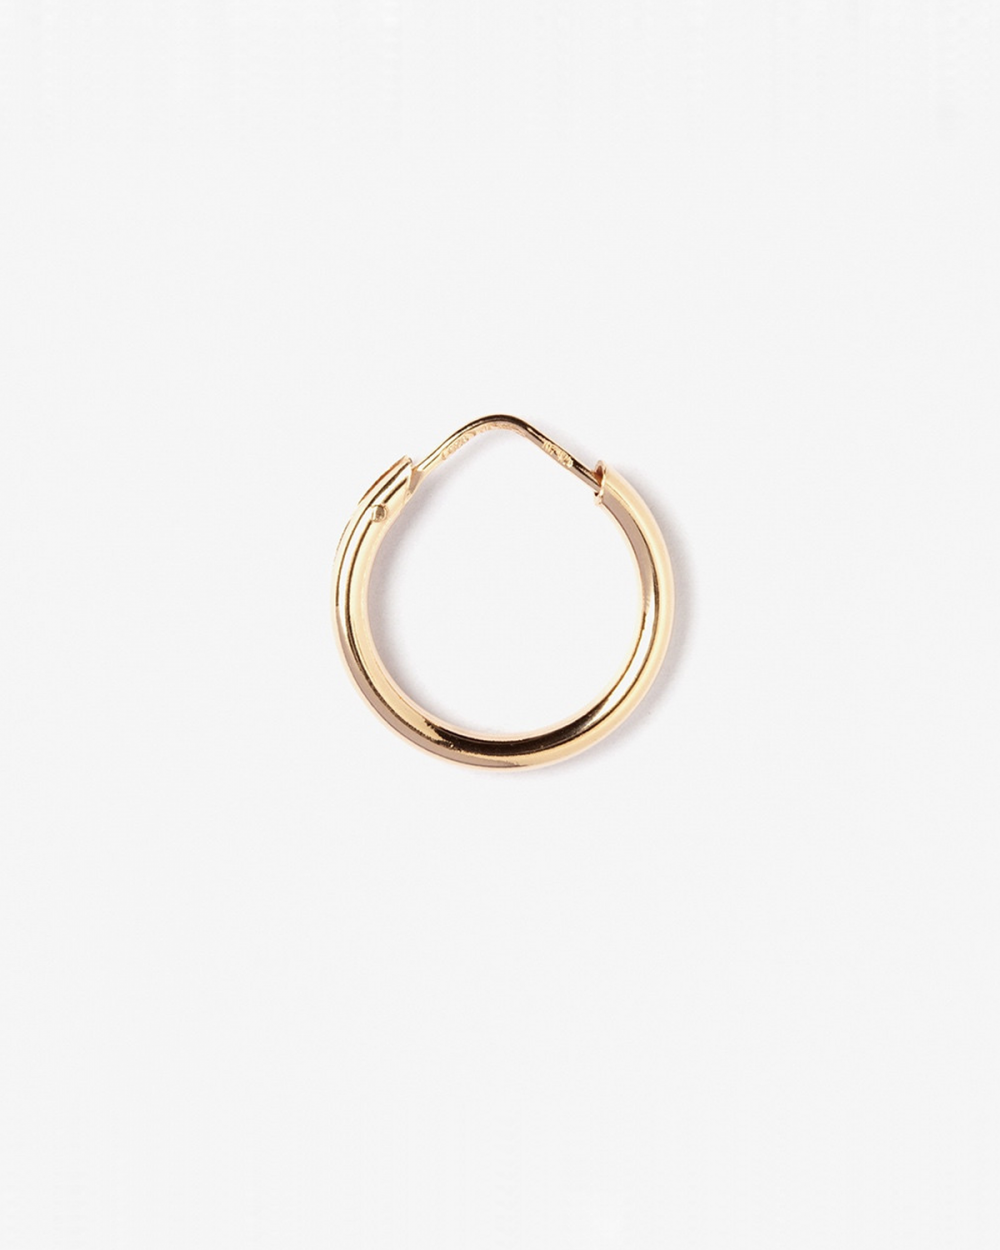 ROUND TUBE 2,5 CLOSING PIN SINGLE HOOP EARRING D15 MM / POLISHED ROSE GOLD